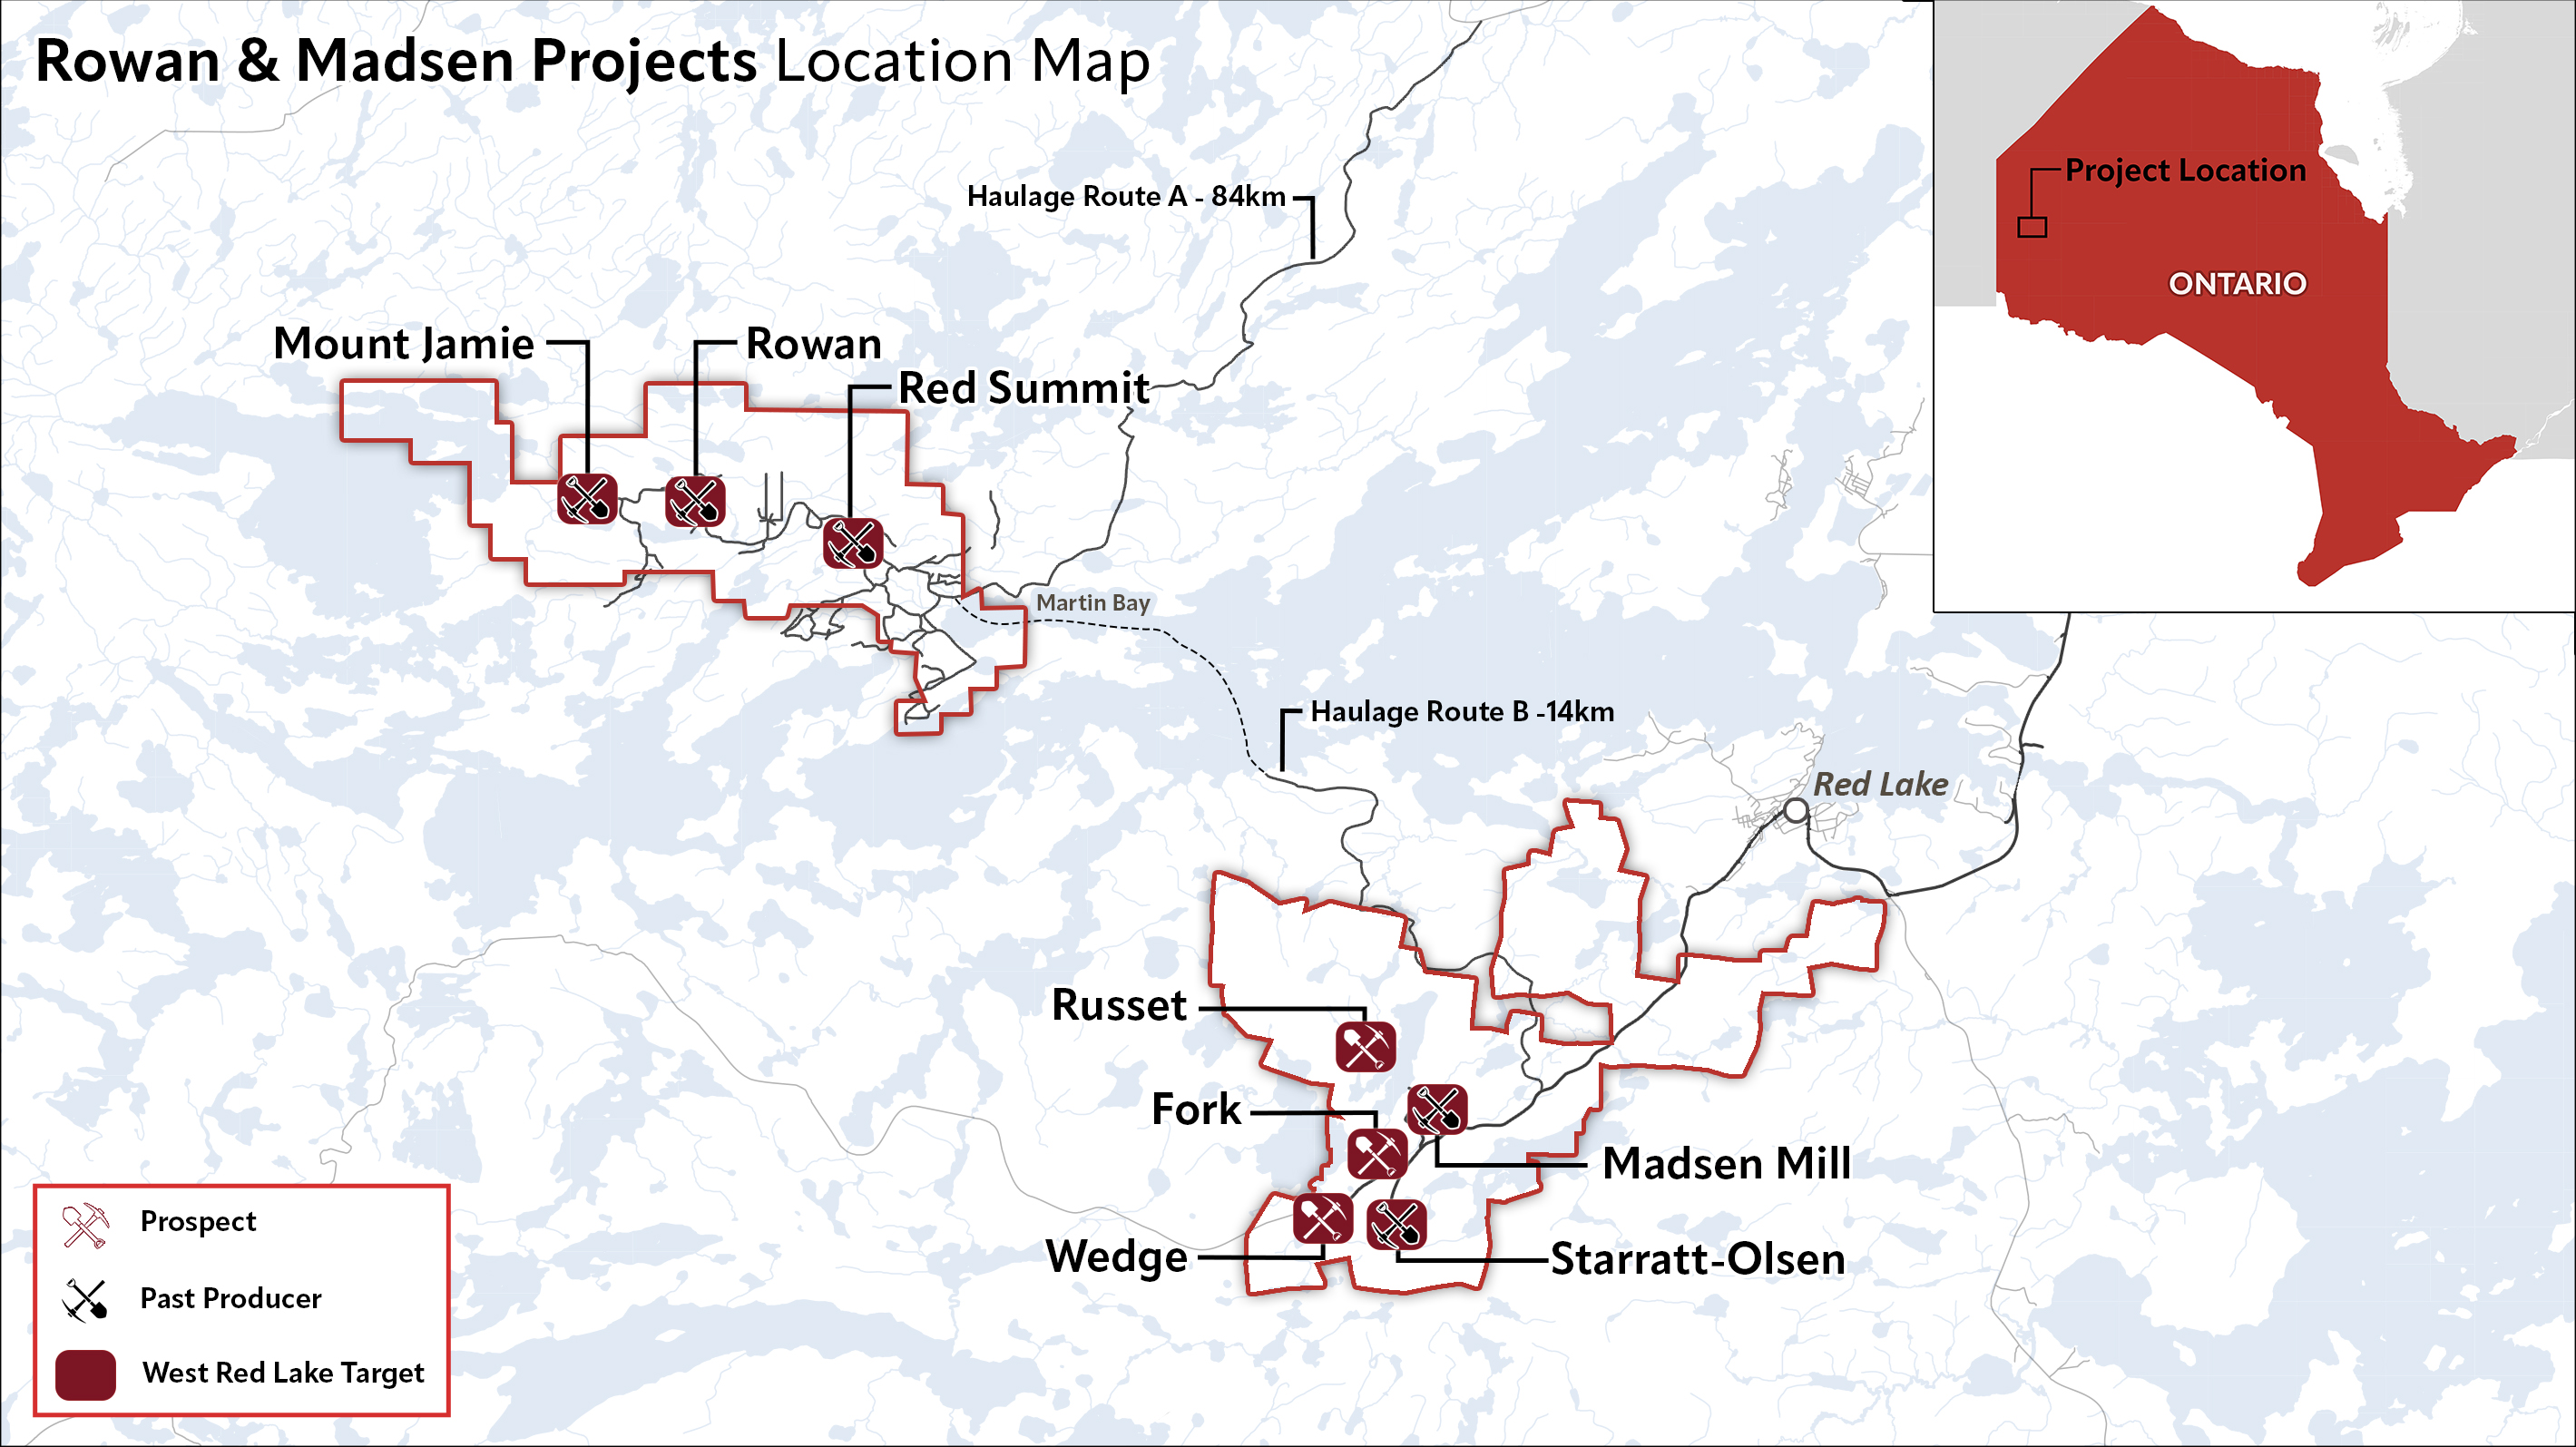 2023-11-09-NR_WRLG_Rowan_and_Madsen_Projects_Location_Map